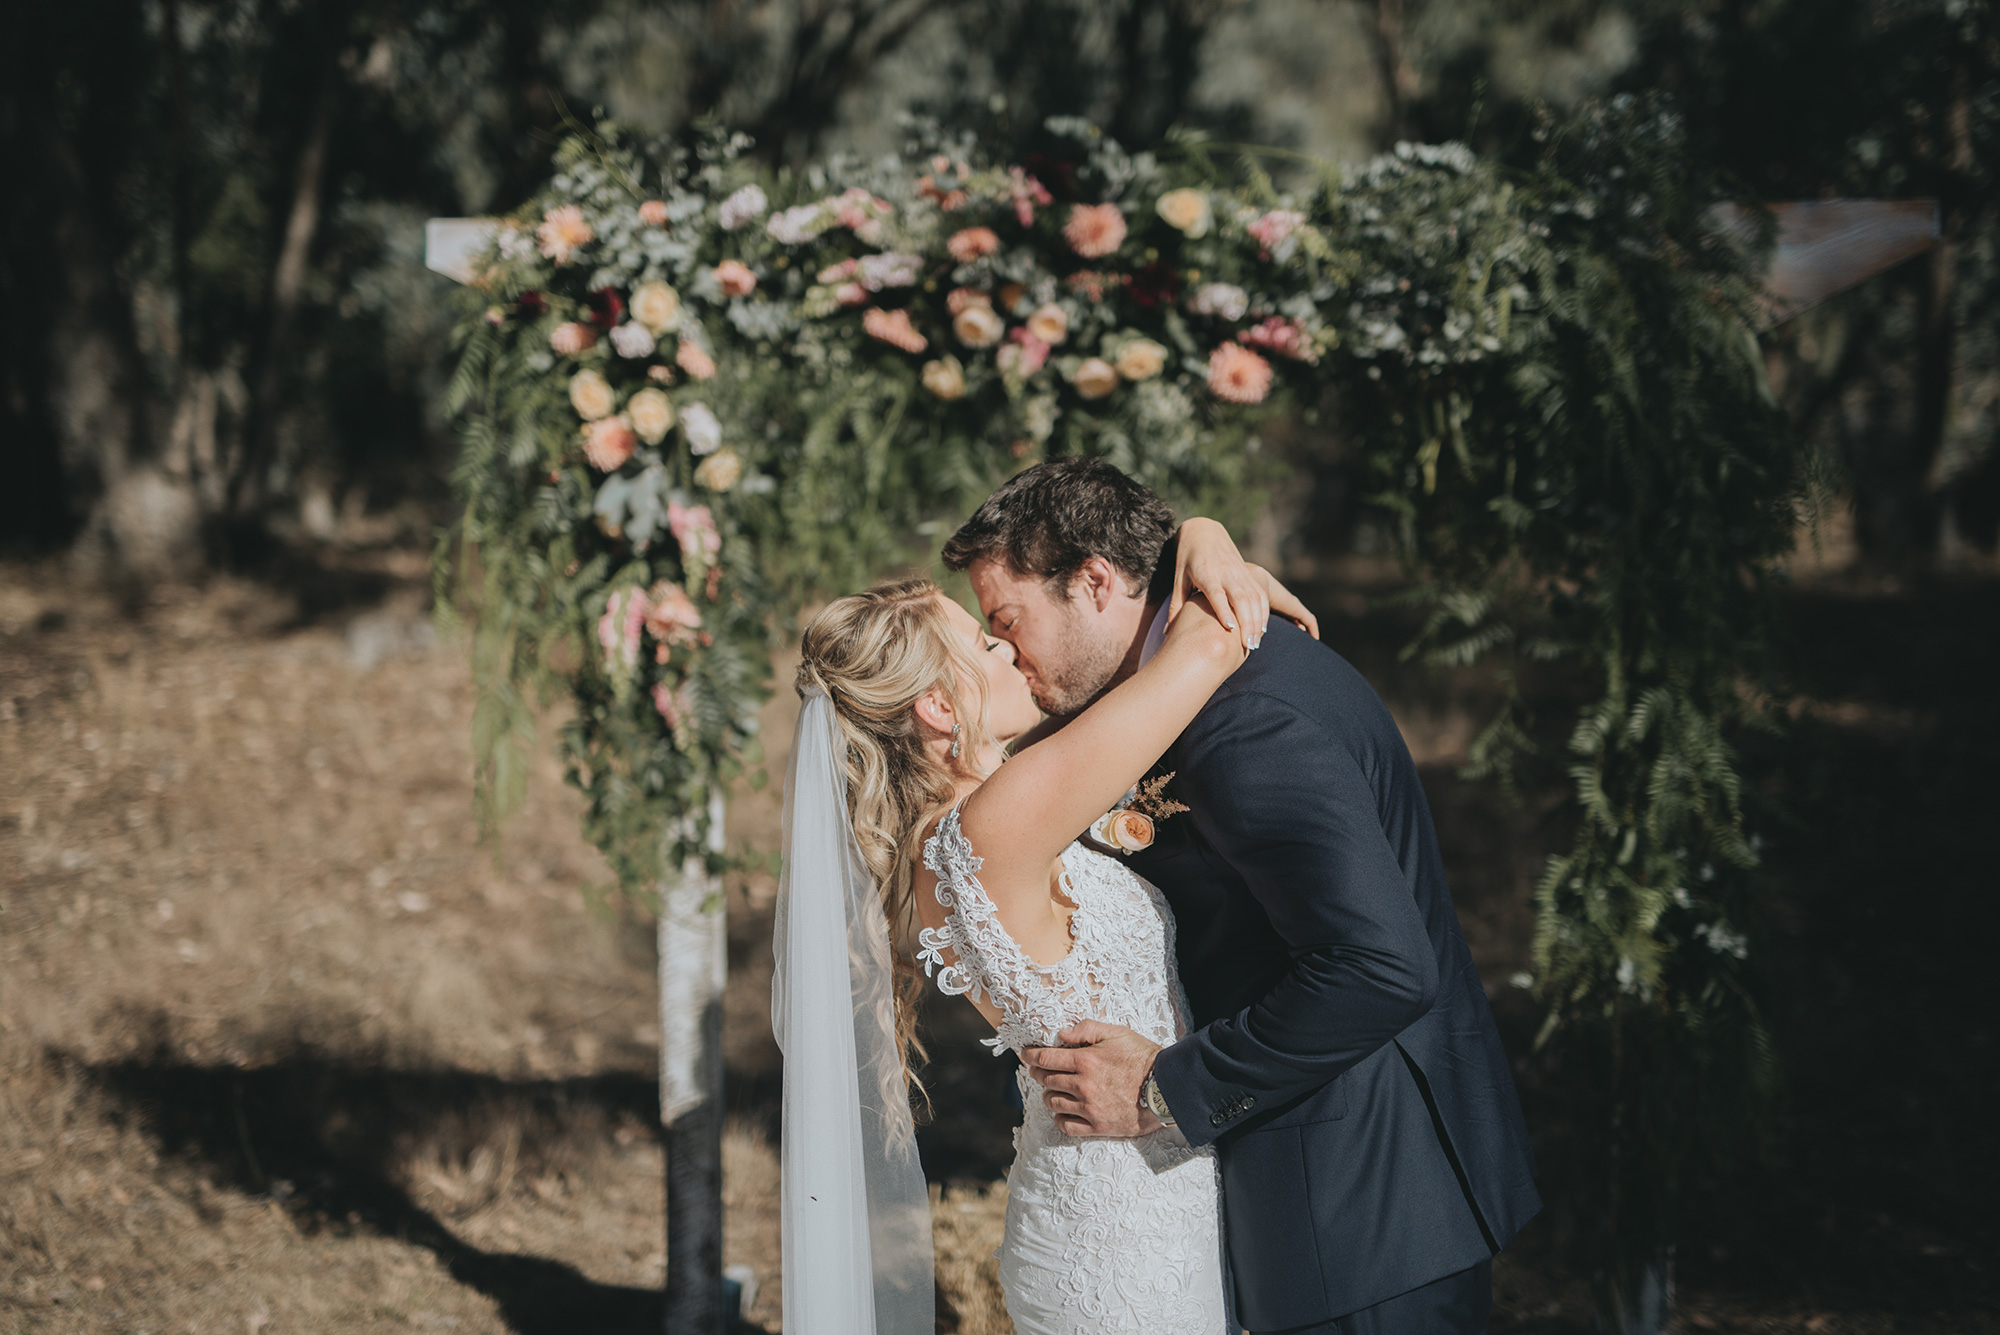 Kate_Tristan_Country-Rustic-Wedding_008